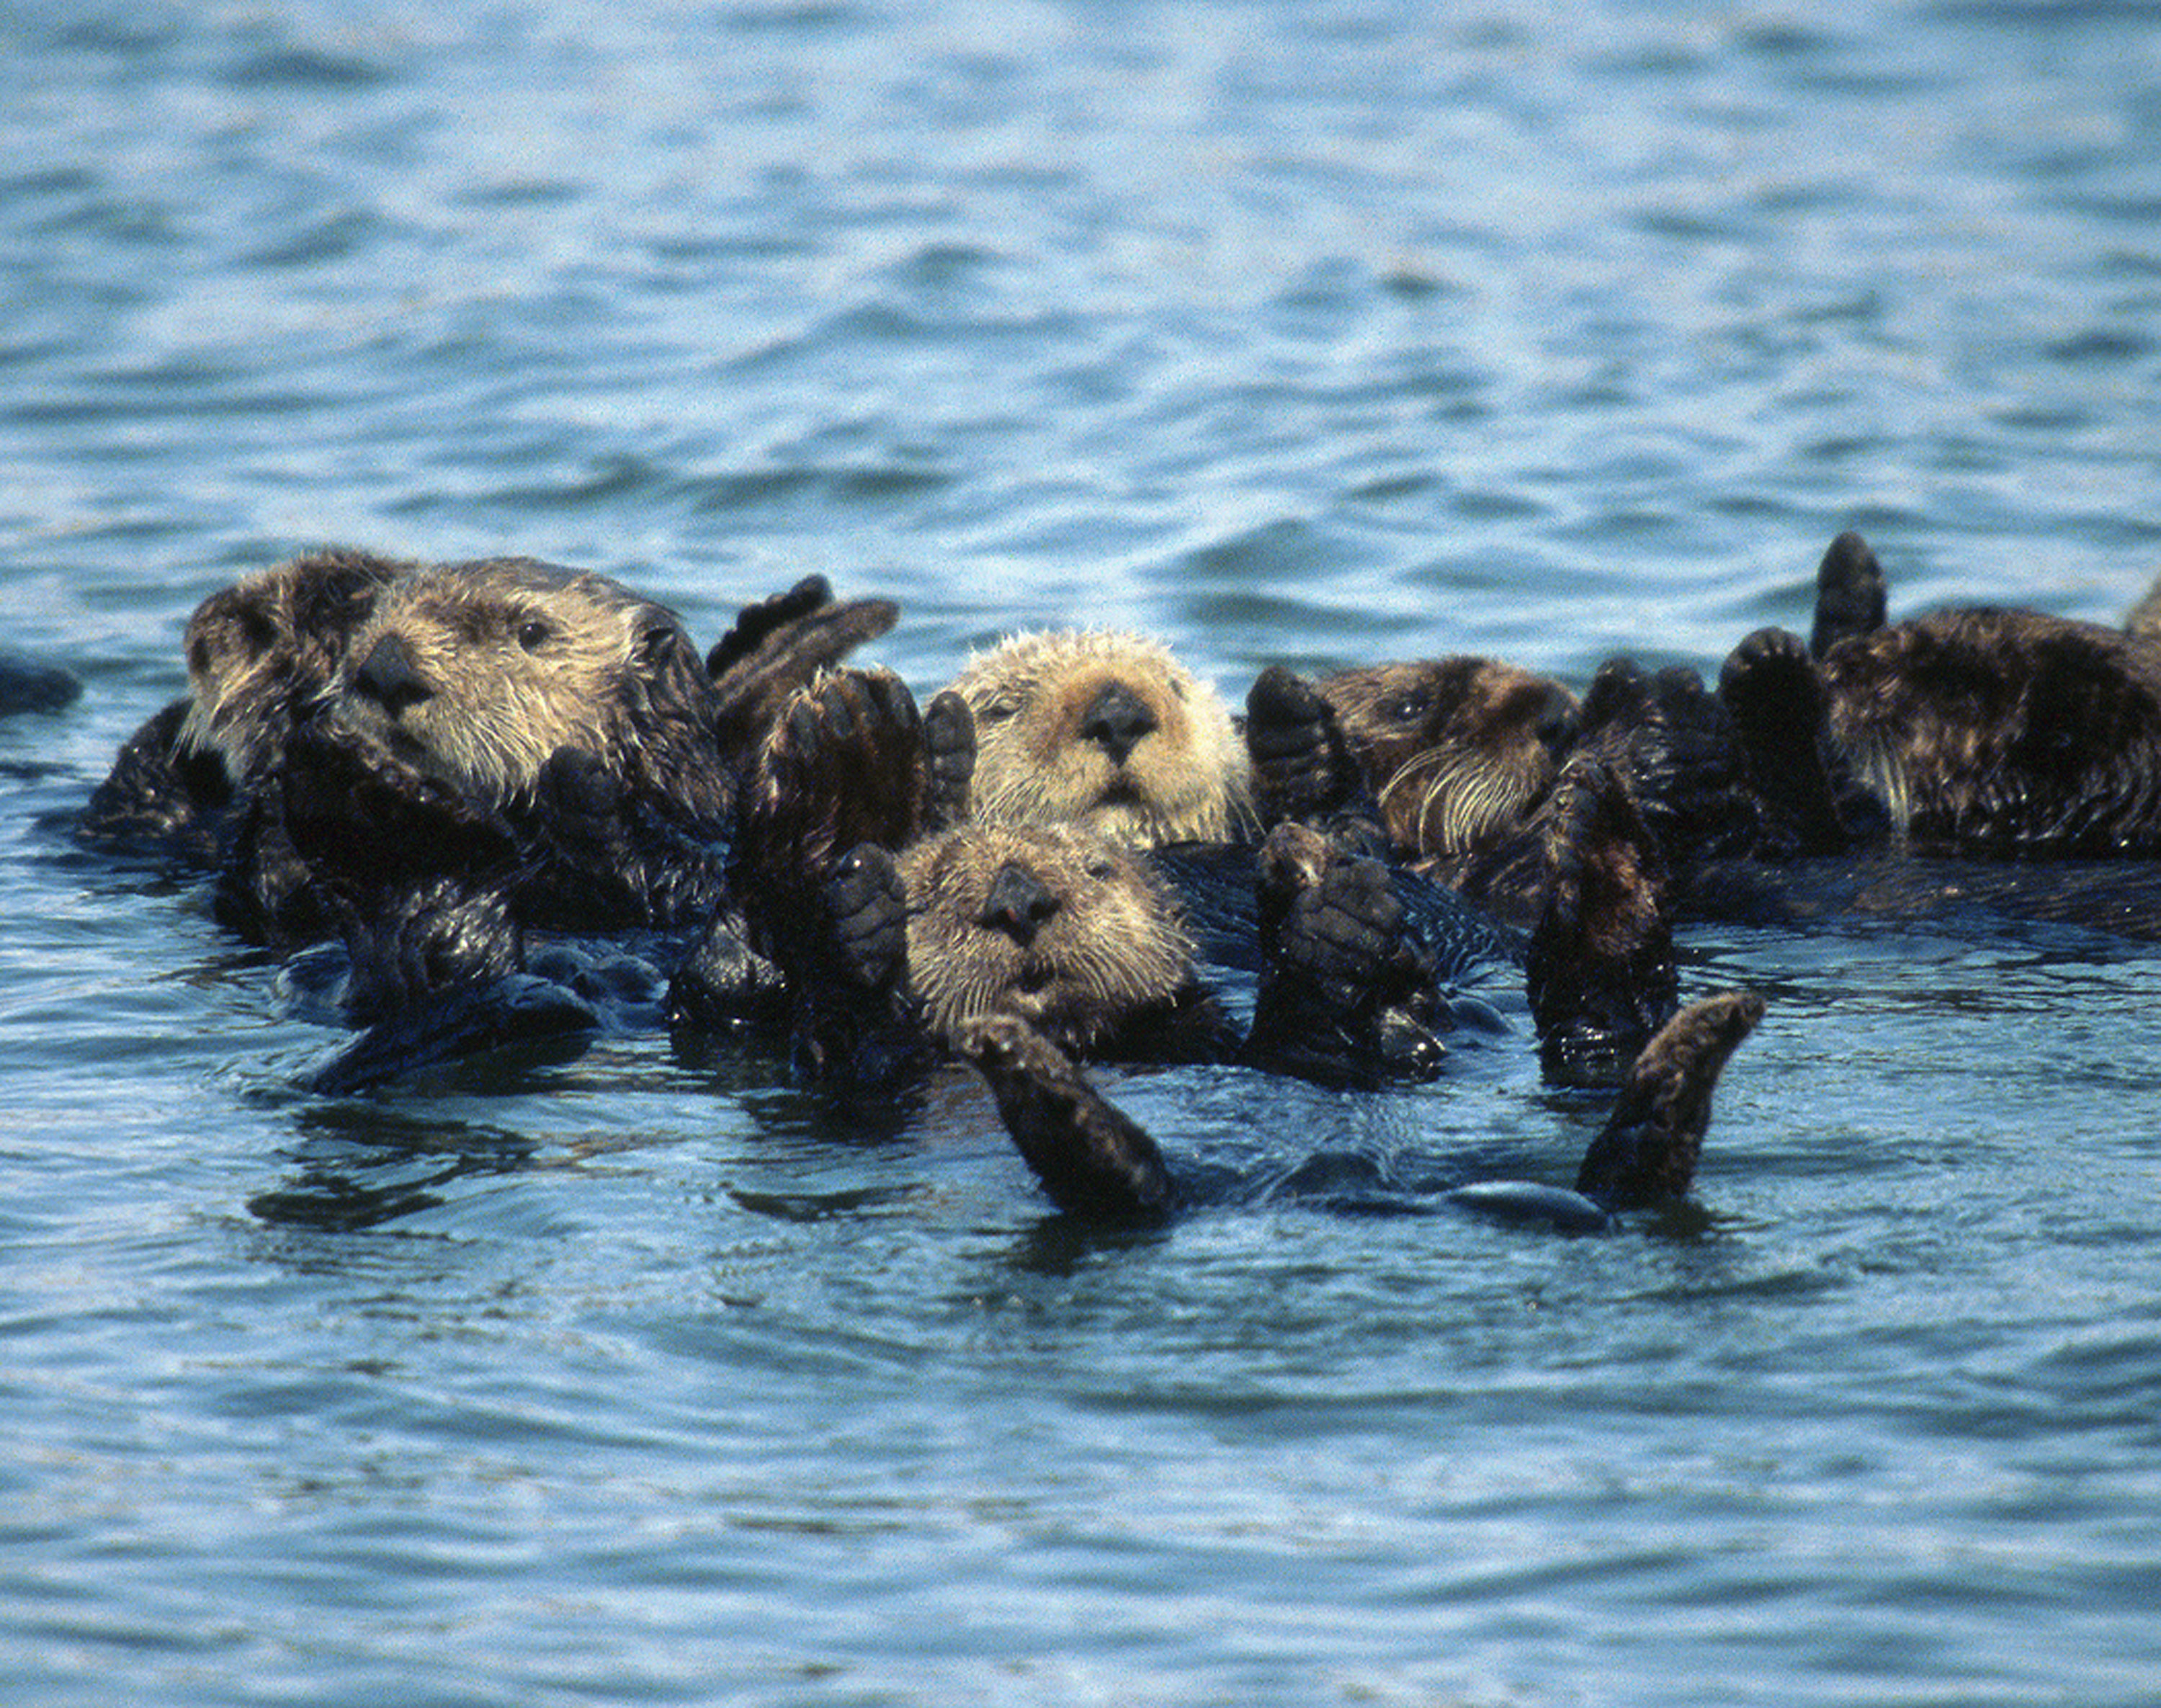 Sea otters floating in a group